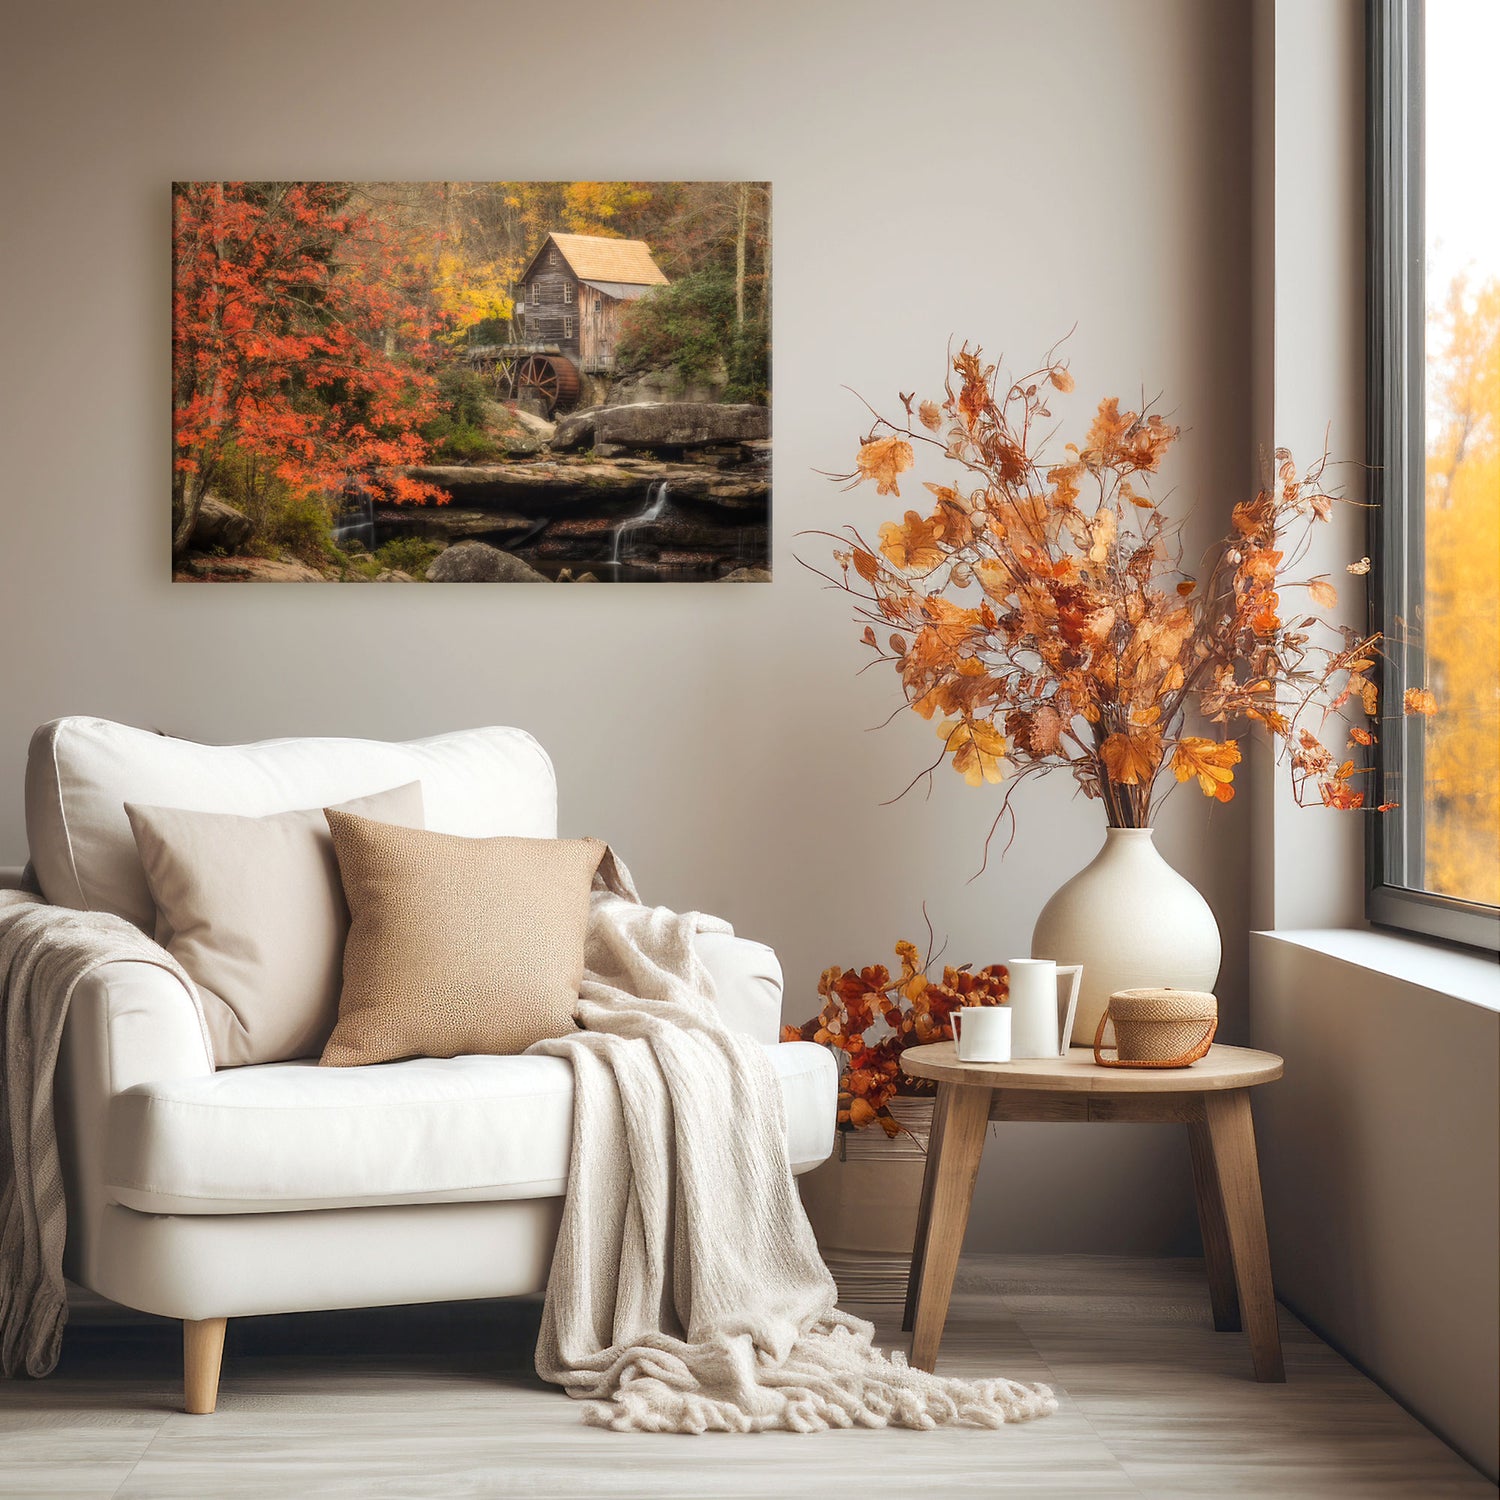 Photographic canvas art featuring an autumnal scene at Glade Creek Grist Mill, available in various sizes and with mirrored image sides.